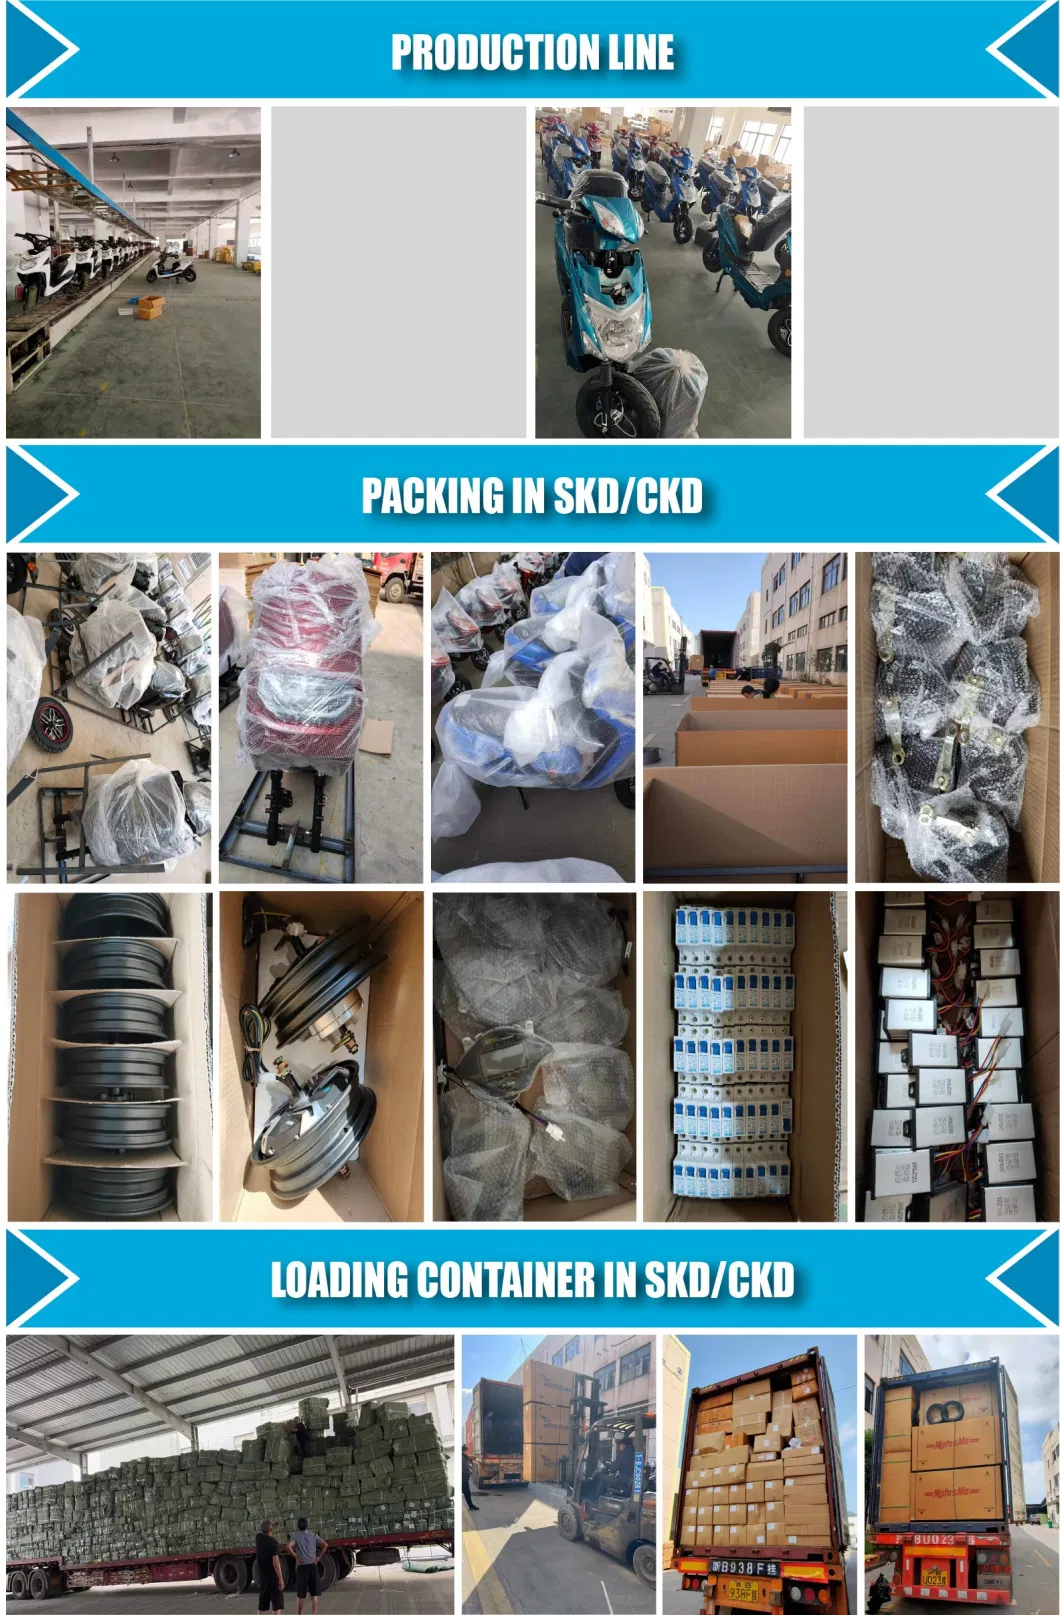 CKD or SKD Hot Sale Model Two Wheel Electric Motorcycle / Electric Scooter Lithium/Lead-Acid Battery Version Electric Motorcycle Bicycle -Tsl-2